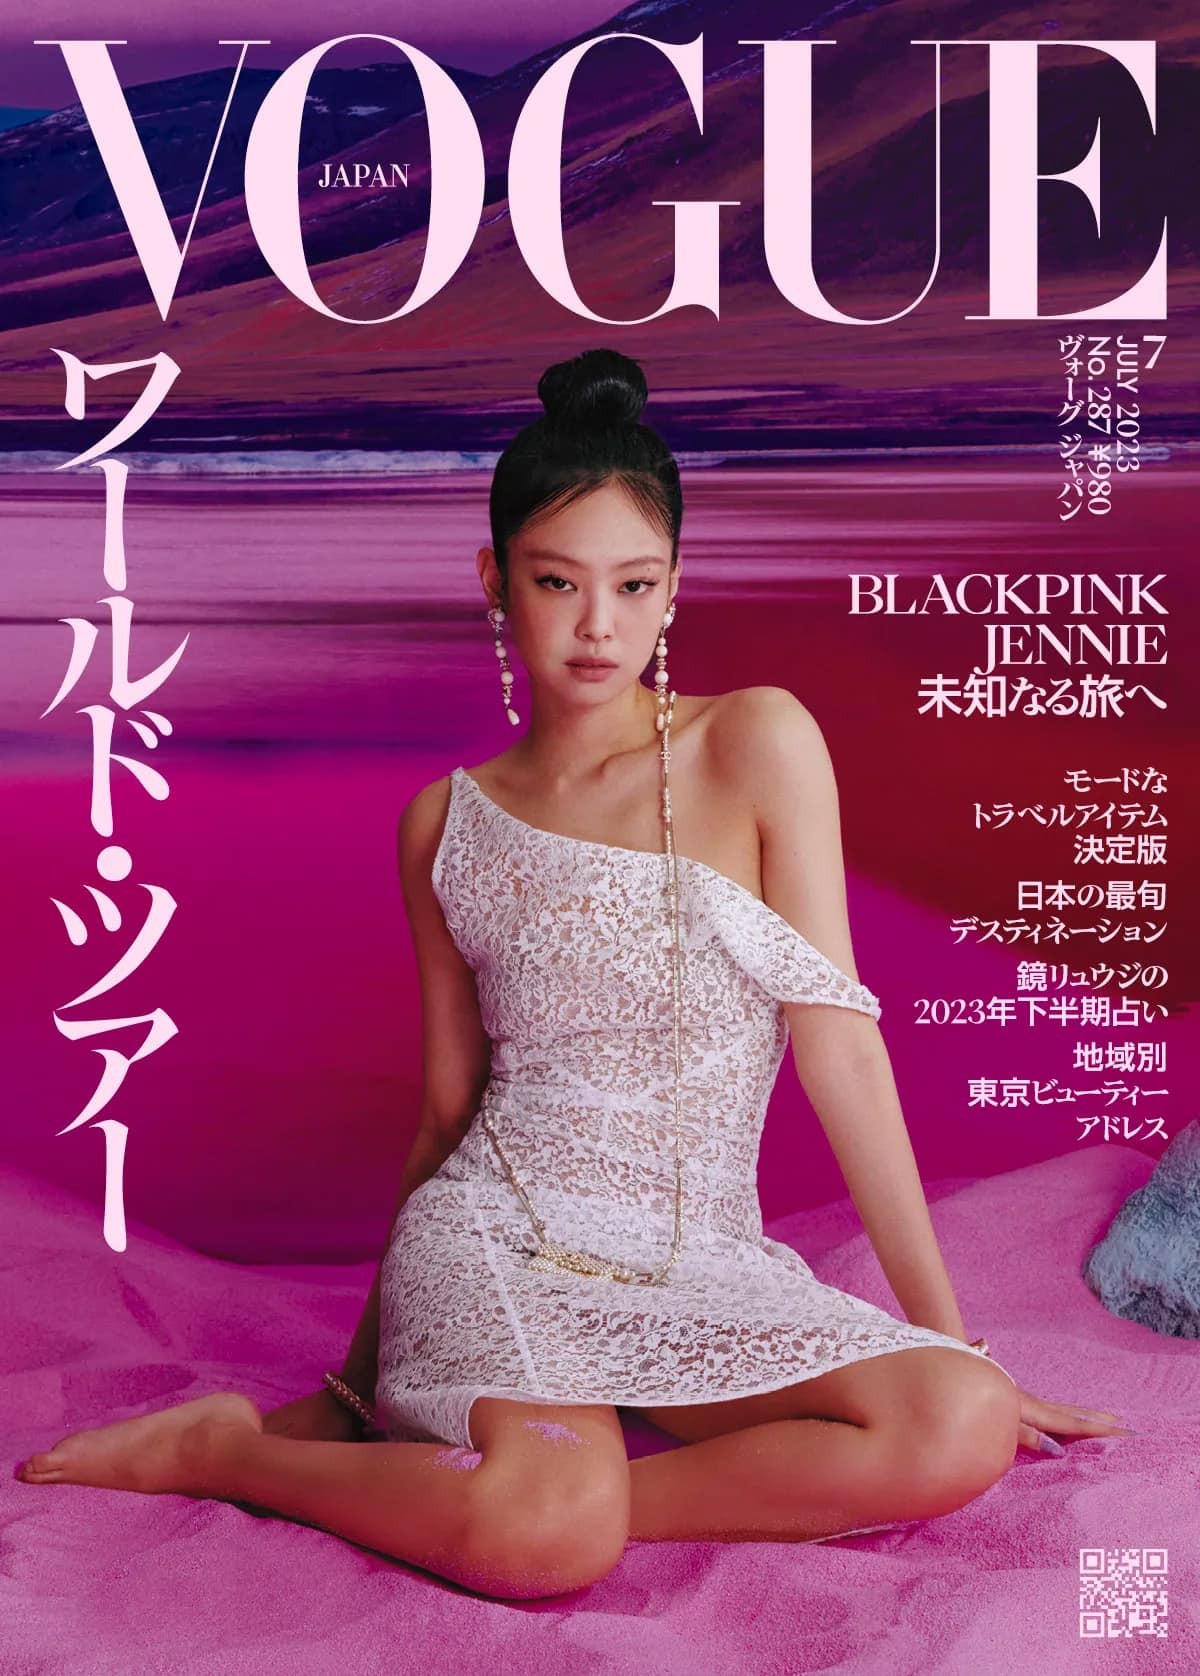 Jennie (BLACKPINK) on the cover of Japanese Vogue: The ability to weigh things and "take pictures" has no point in criticizing photos 1